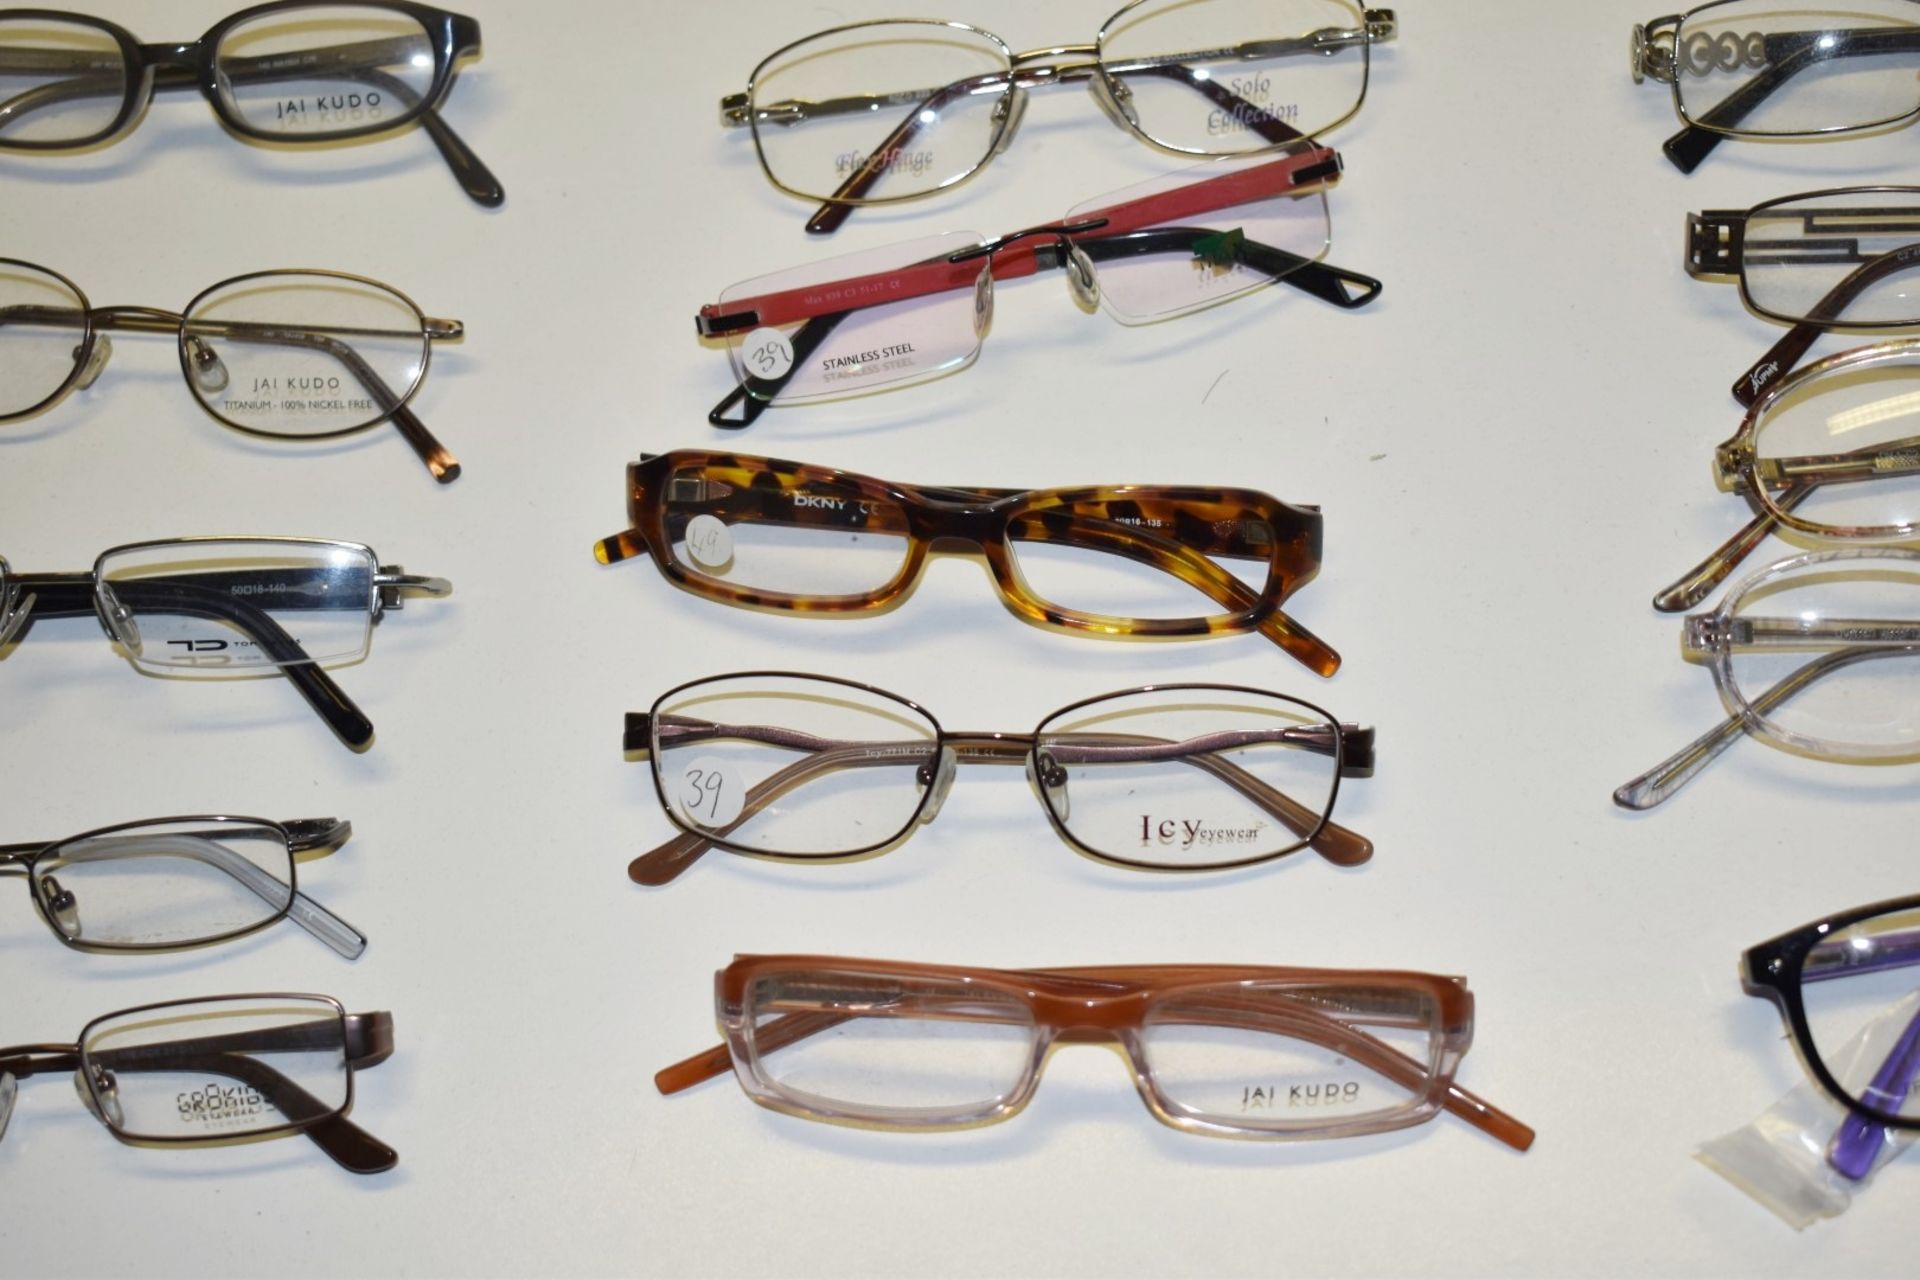 50 x Assorted Pairs of Spectacle Eye Glasses - New and Unused Stock - Various Designs and Brands - Image 18 of 19